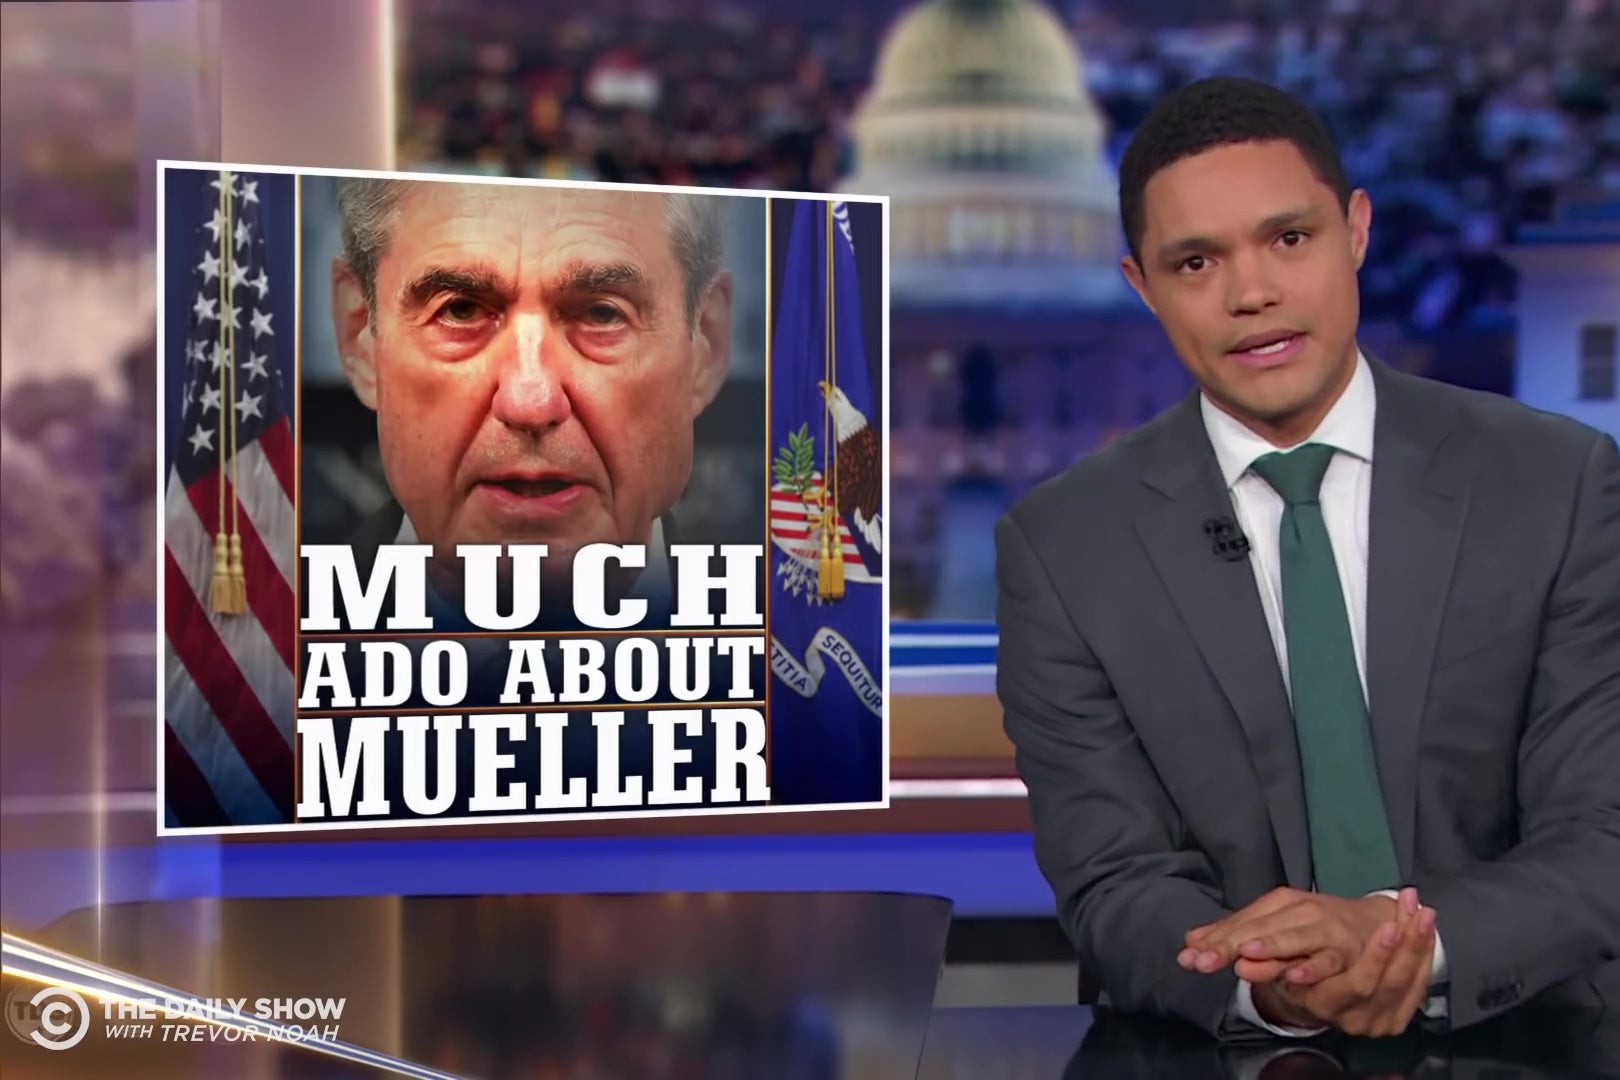 Trevor Noah sits at an anchor desk in front of a chyron reading "Much Ado About Mueller."